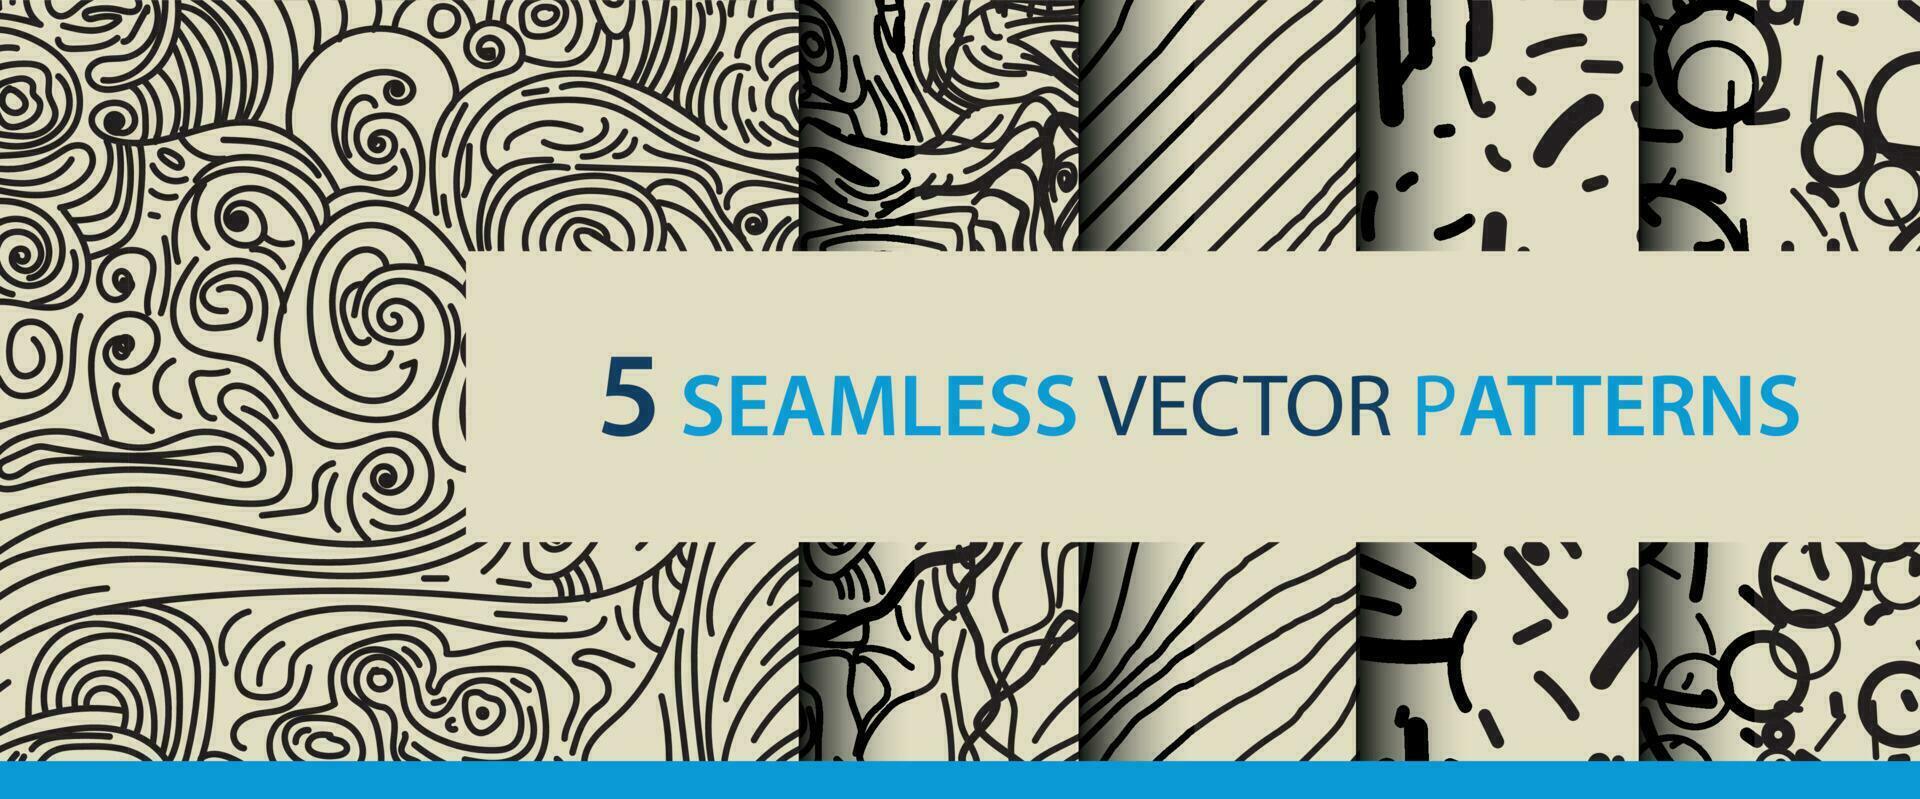 5 SEAMLESS VECTOR PATTERNS Abstract organic lines seamless patterns vector backgrounds set. Modern trendy creative Memphis and biological patterns with dots